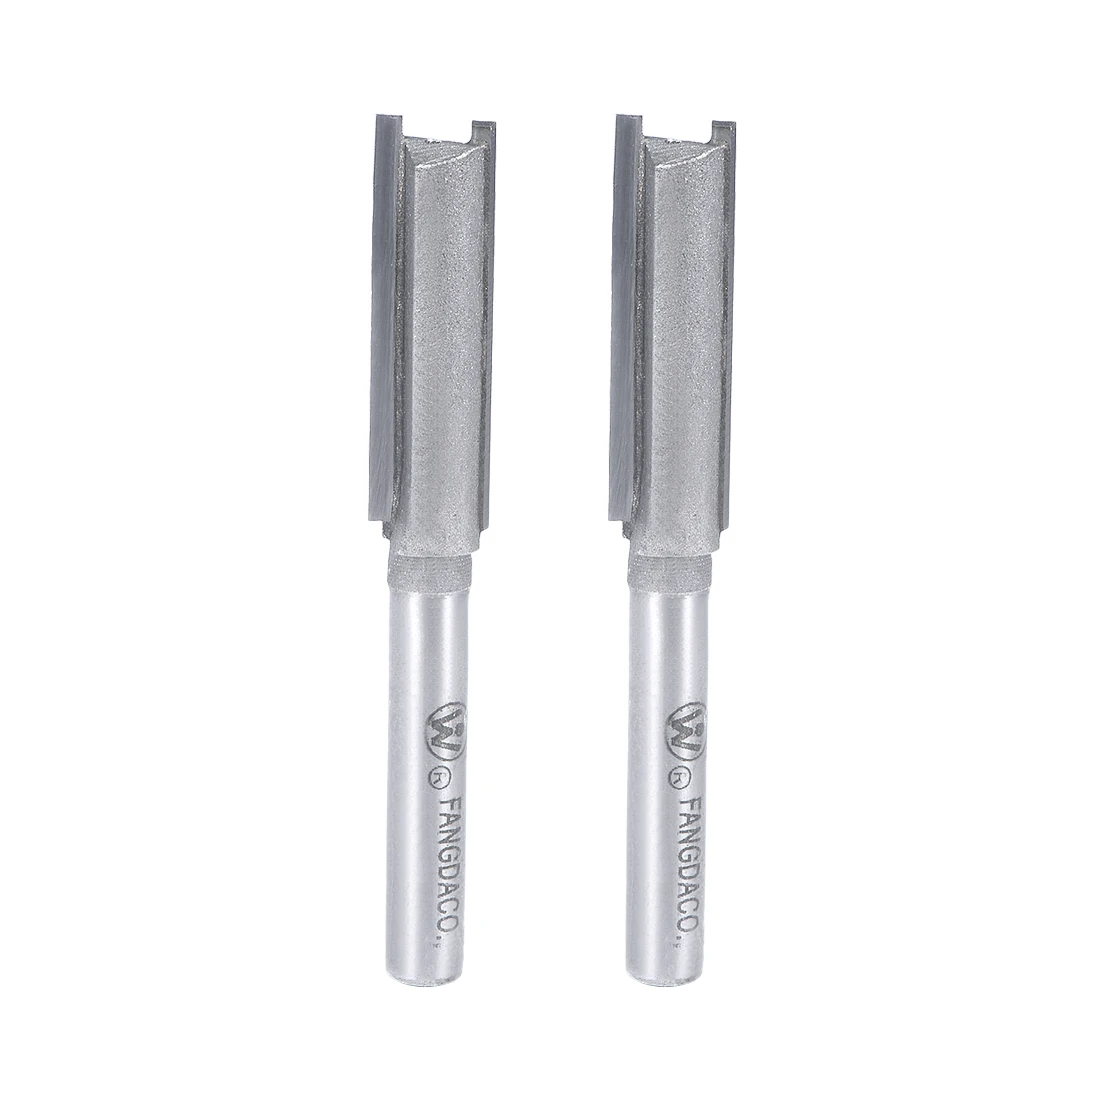 

uxcell Router Bit 1/4 Shank 3/8 inch Cutting Dia. 2 Straight Flutes HSS for Woodworking Milling Cutter Tool 2pcs